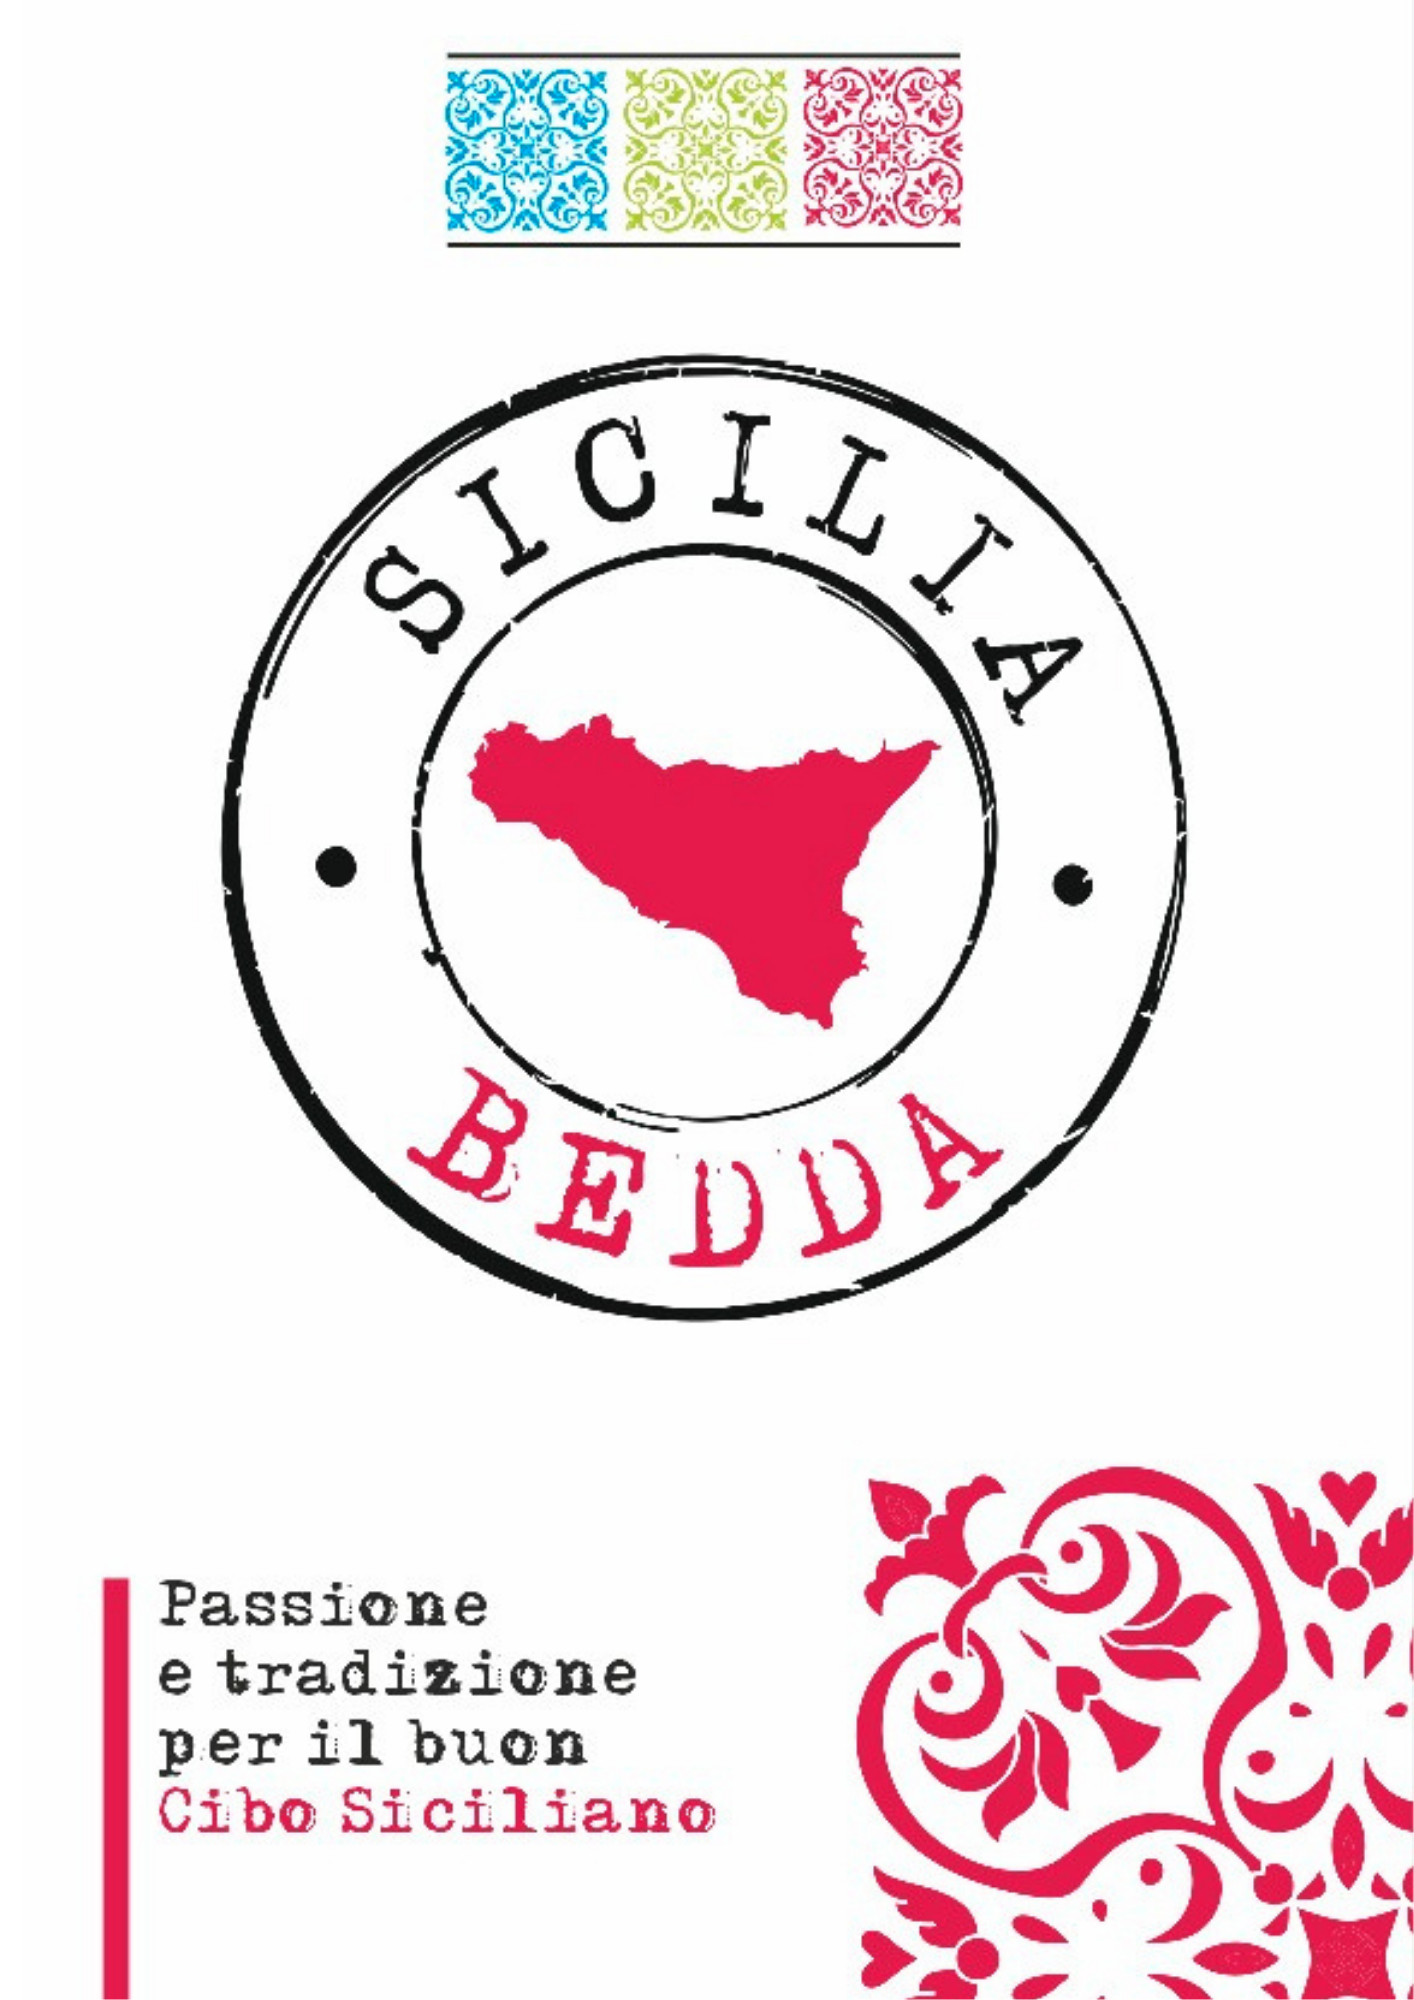 https://www.siciliabeddapanineria.it/wp-content/uploads/2022/05/6.png